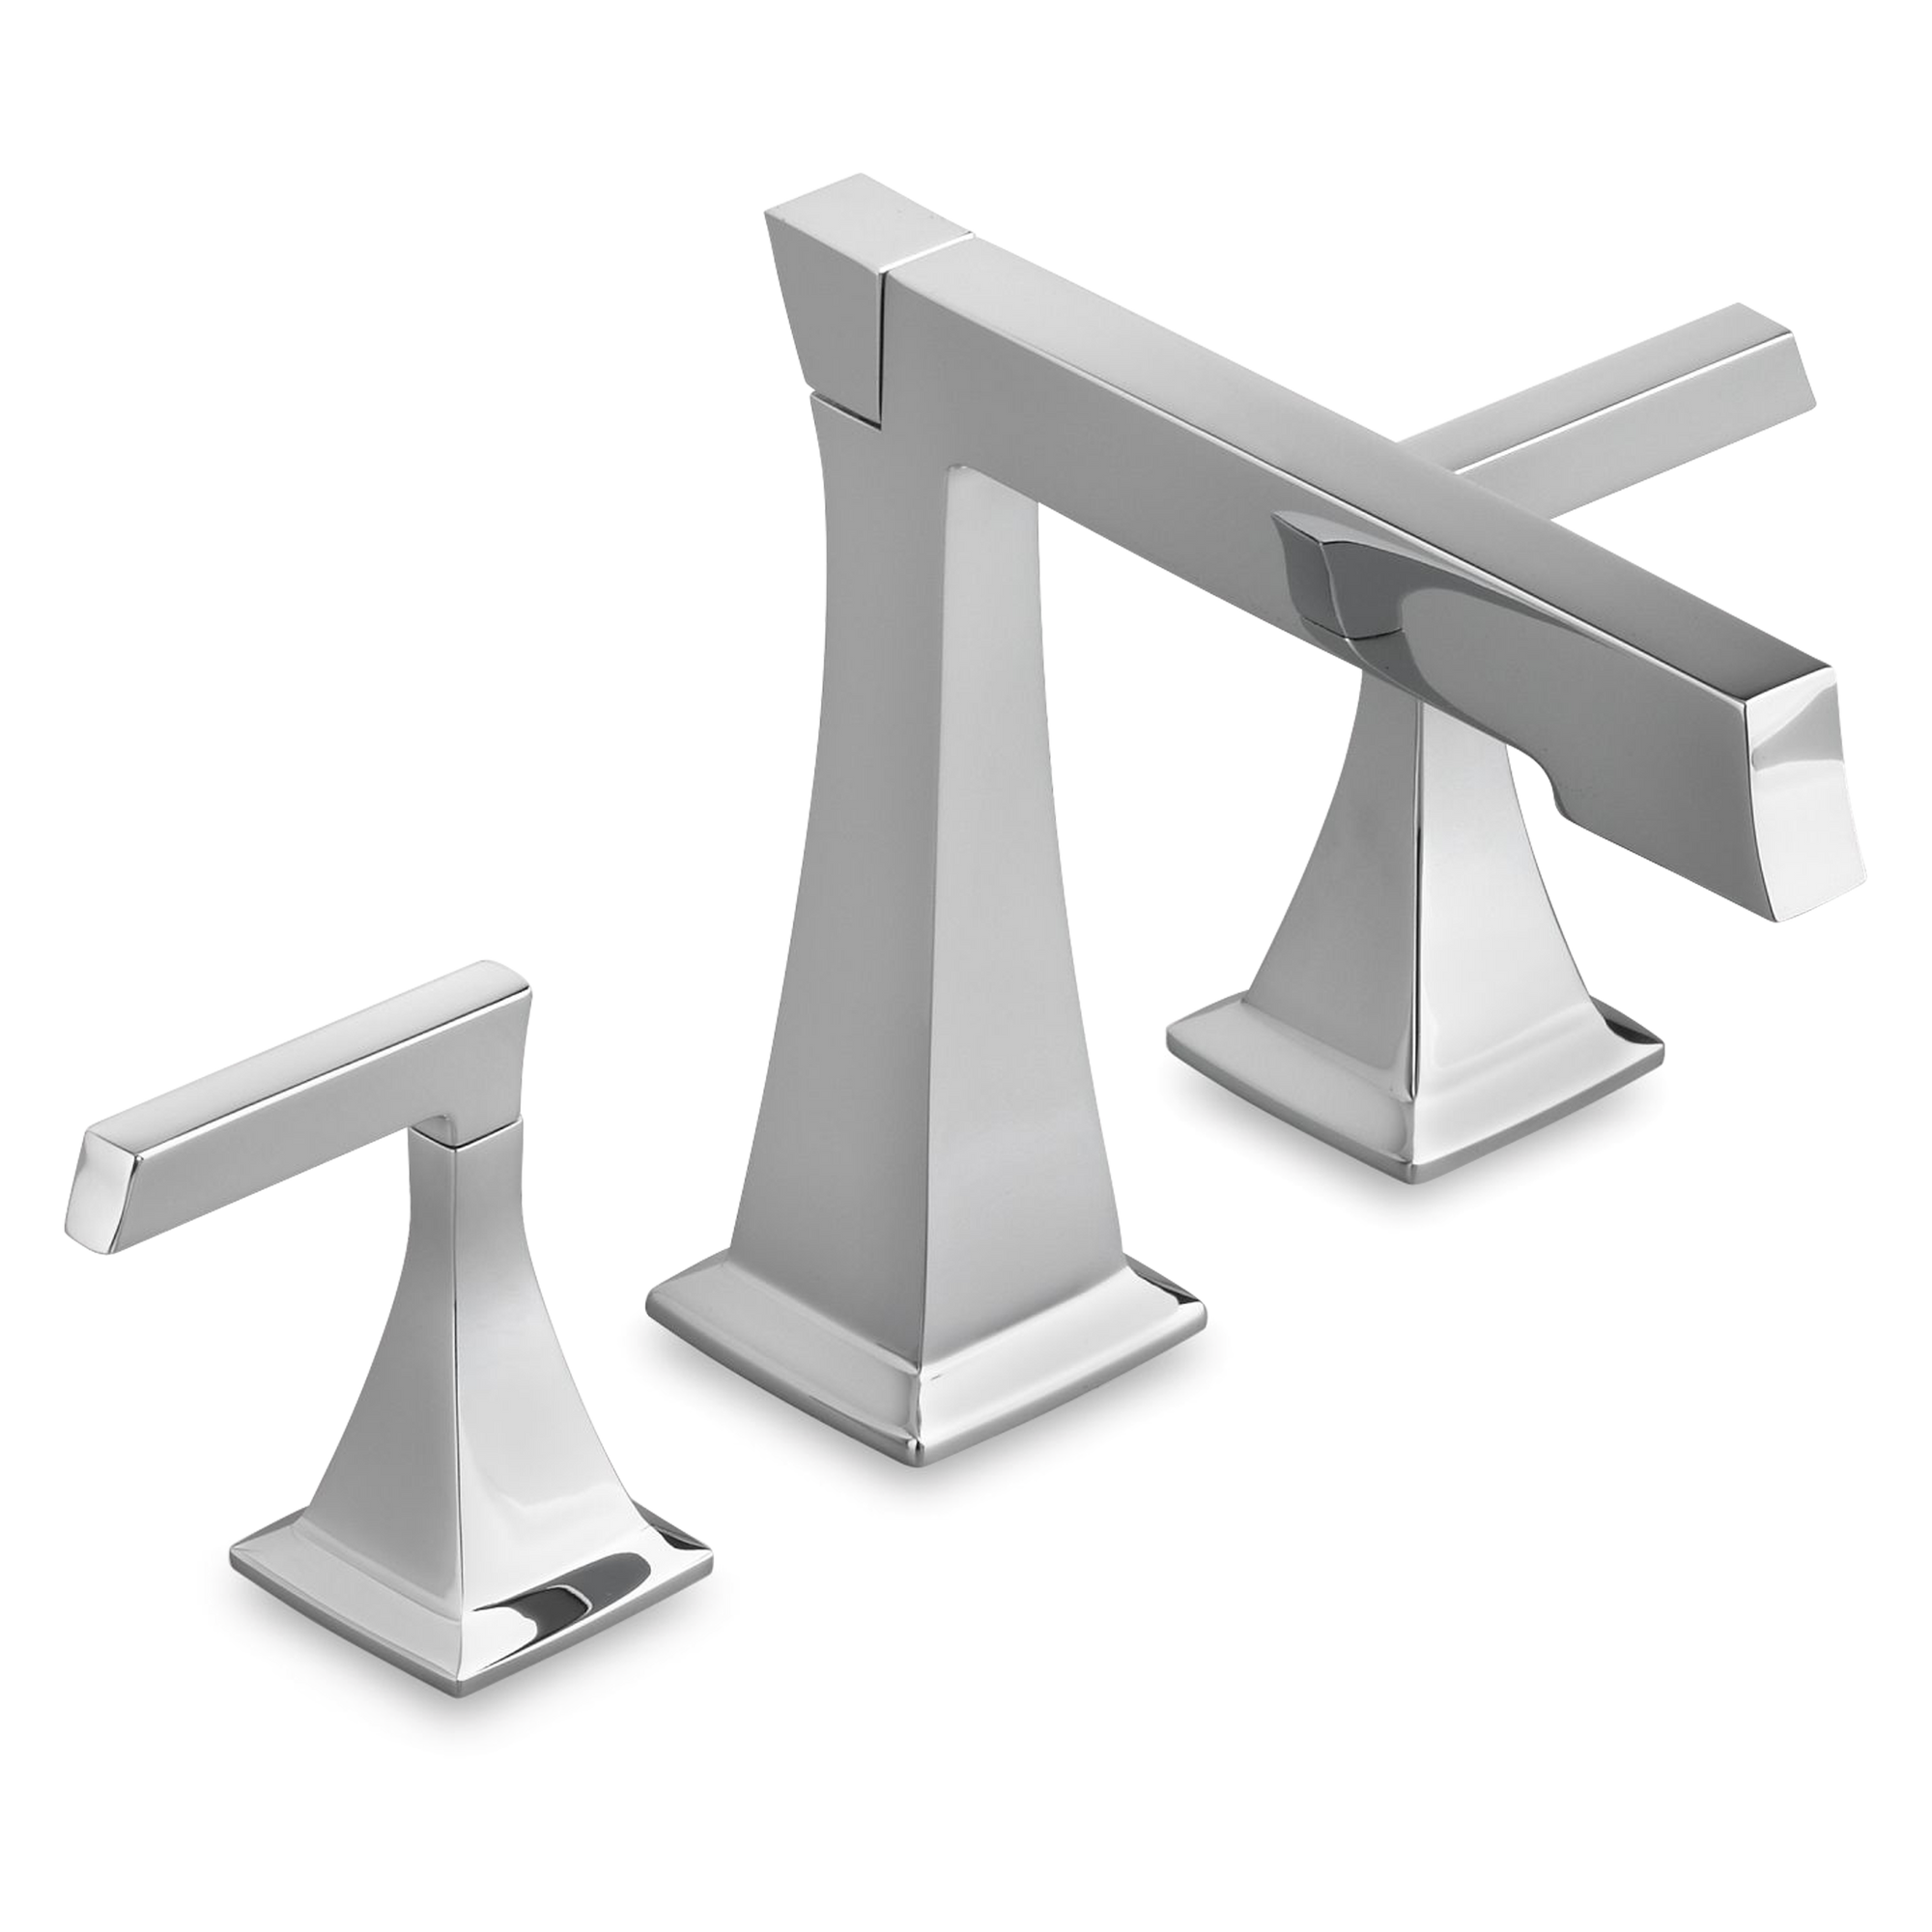 A widespread faucet with two lever handles.